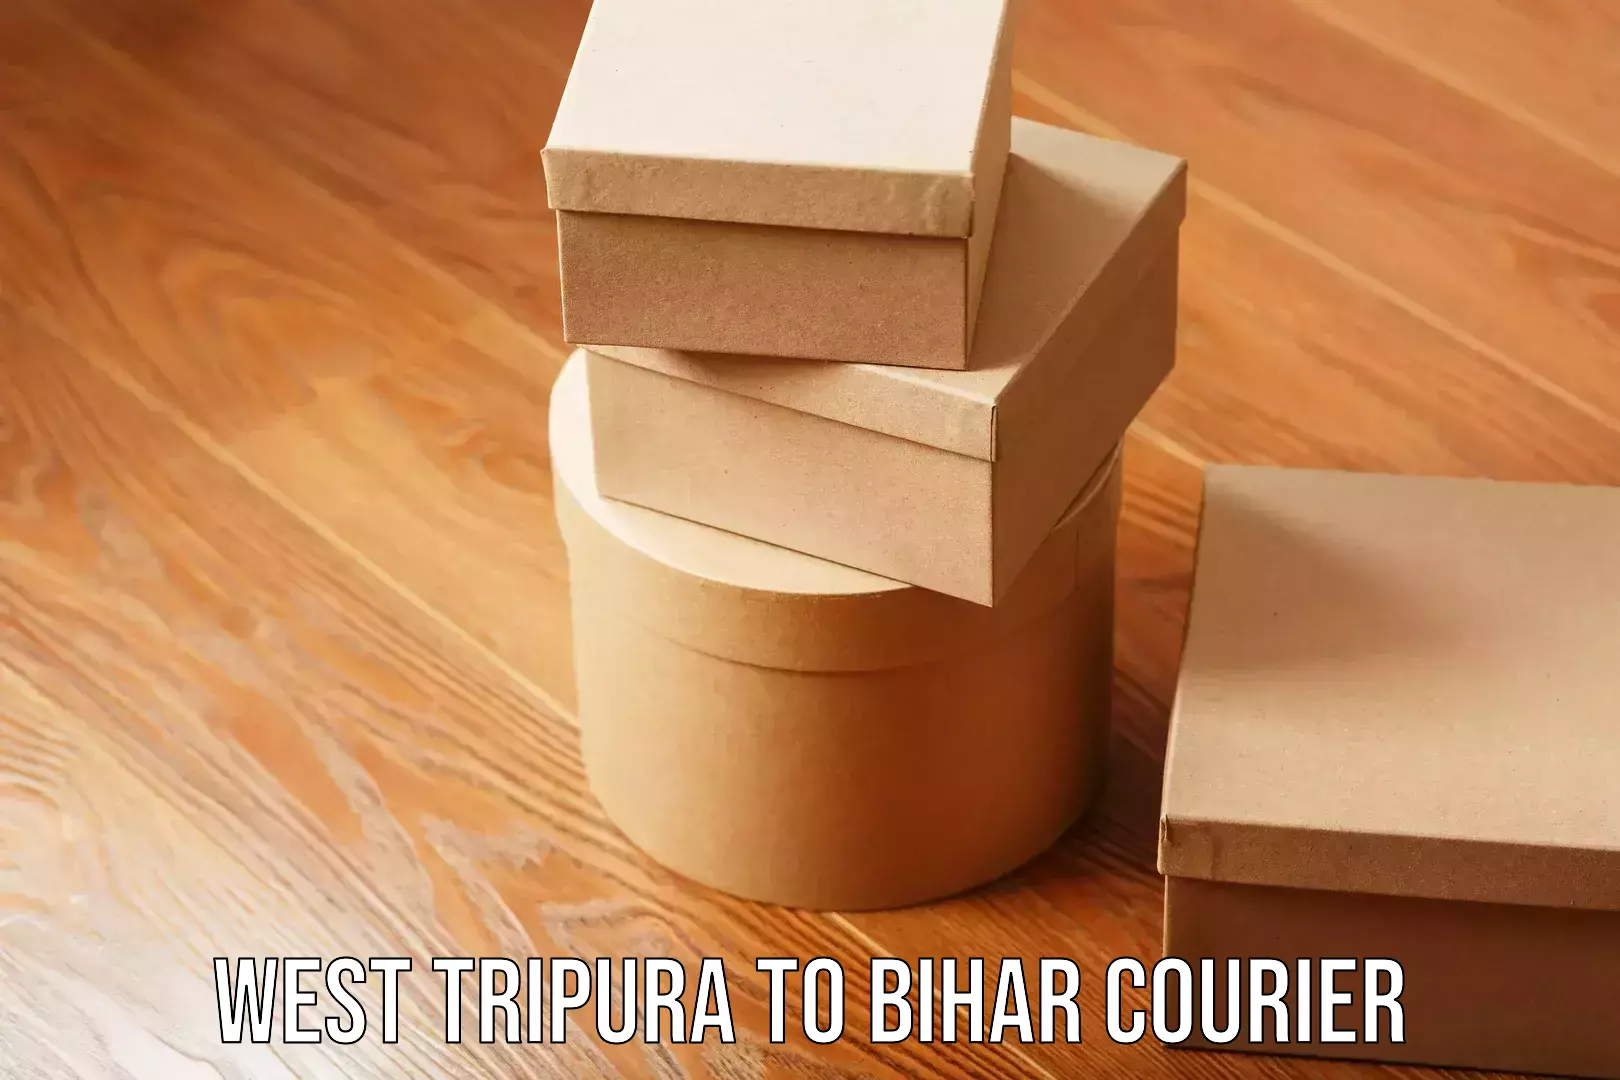 User-friendly delivery service West Tripura to Bihar